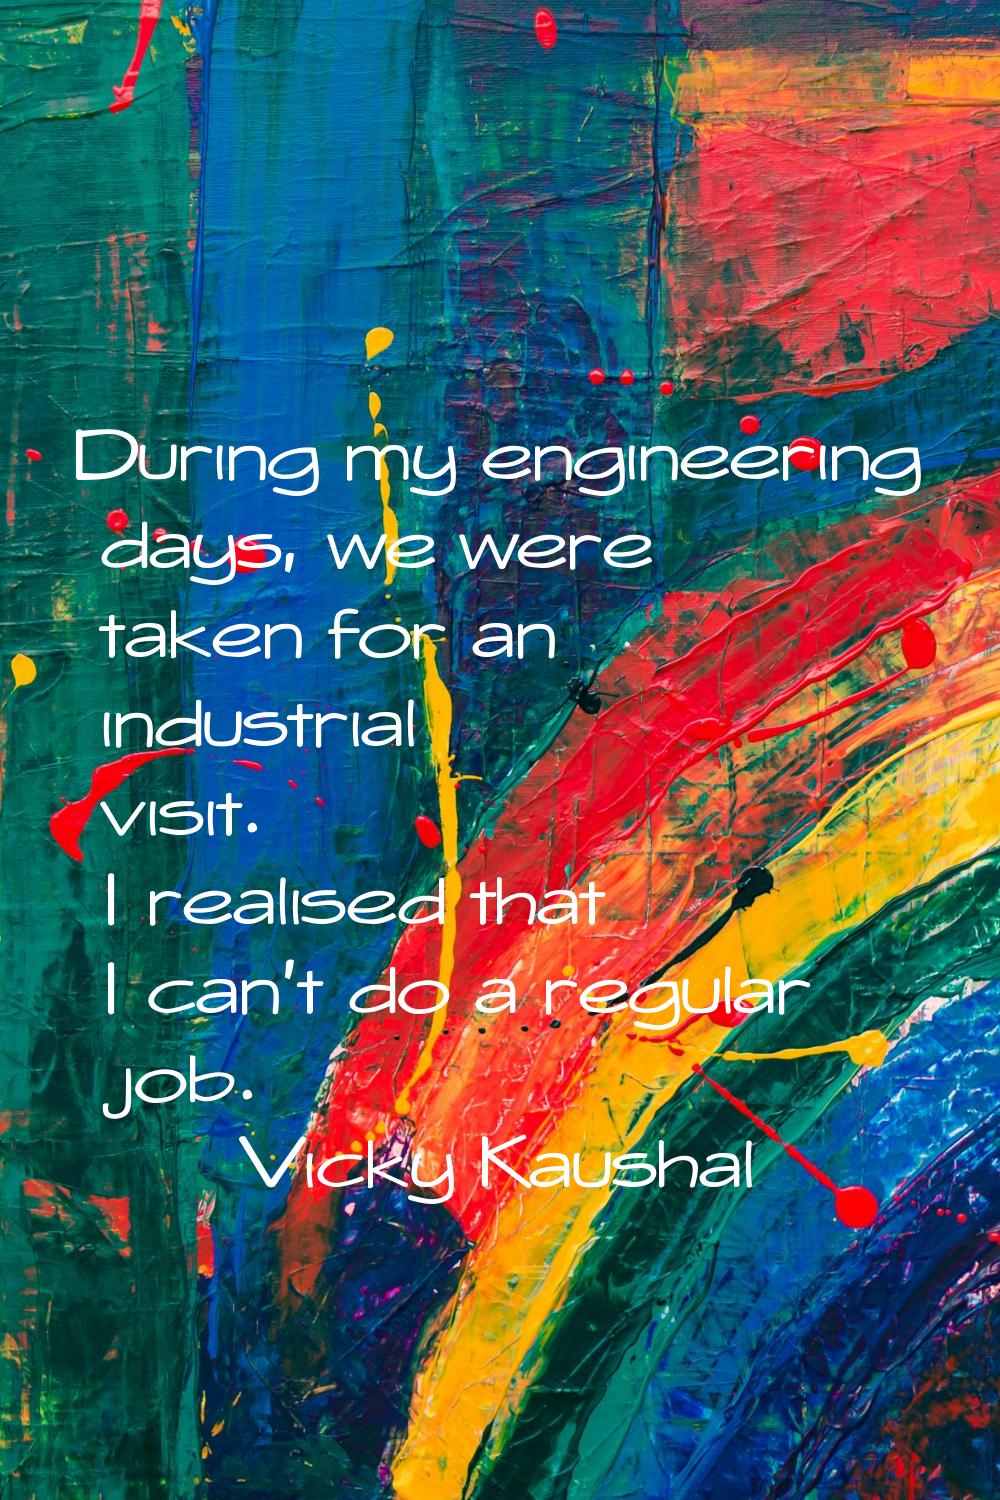 During my engineering days, we were taken for an industrial visit. I realised that I can't do a reg